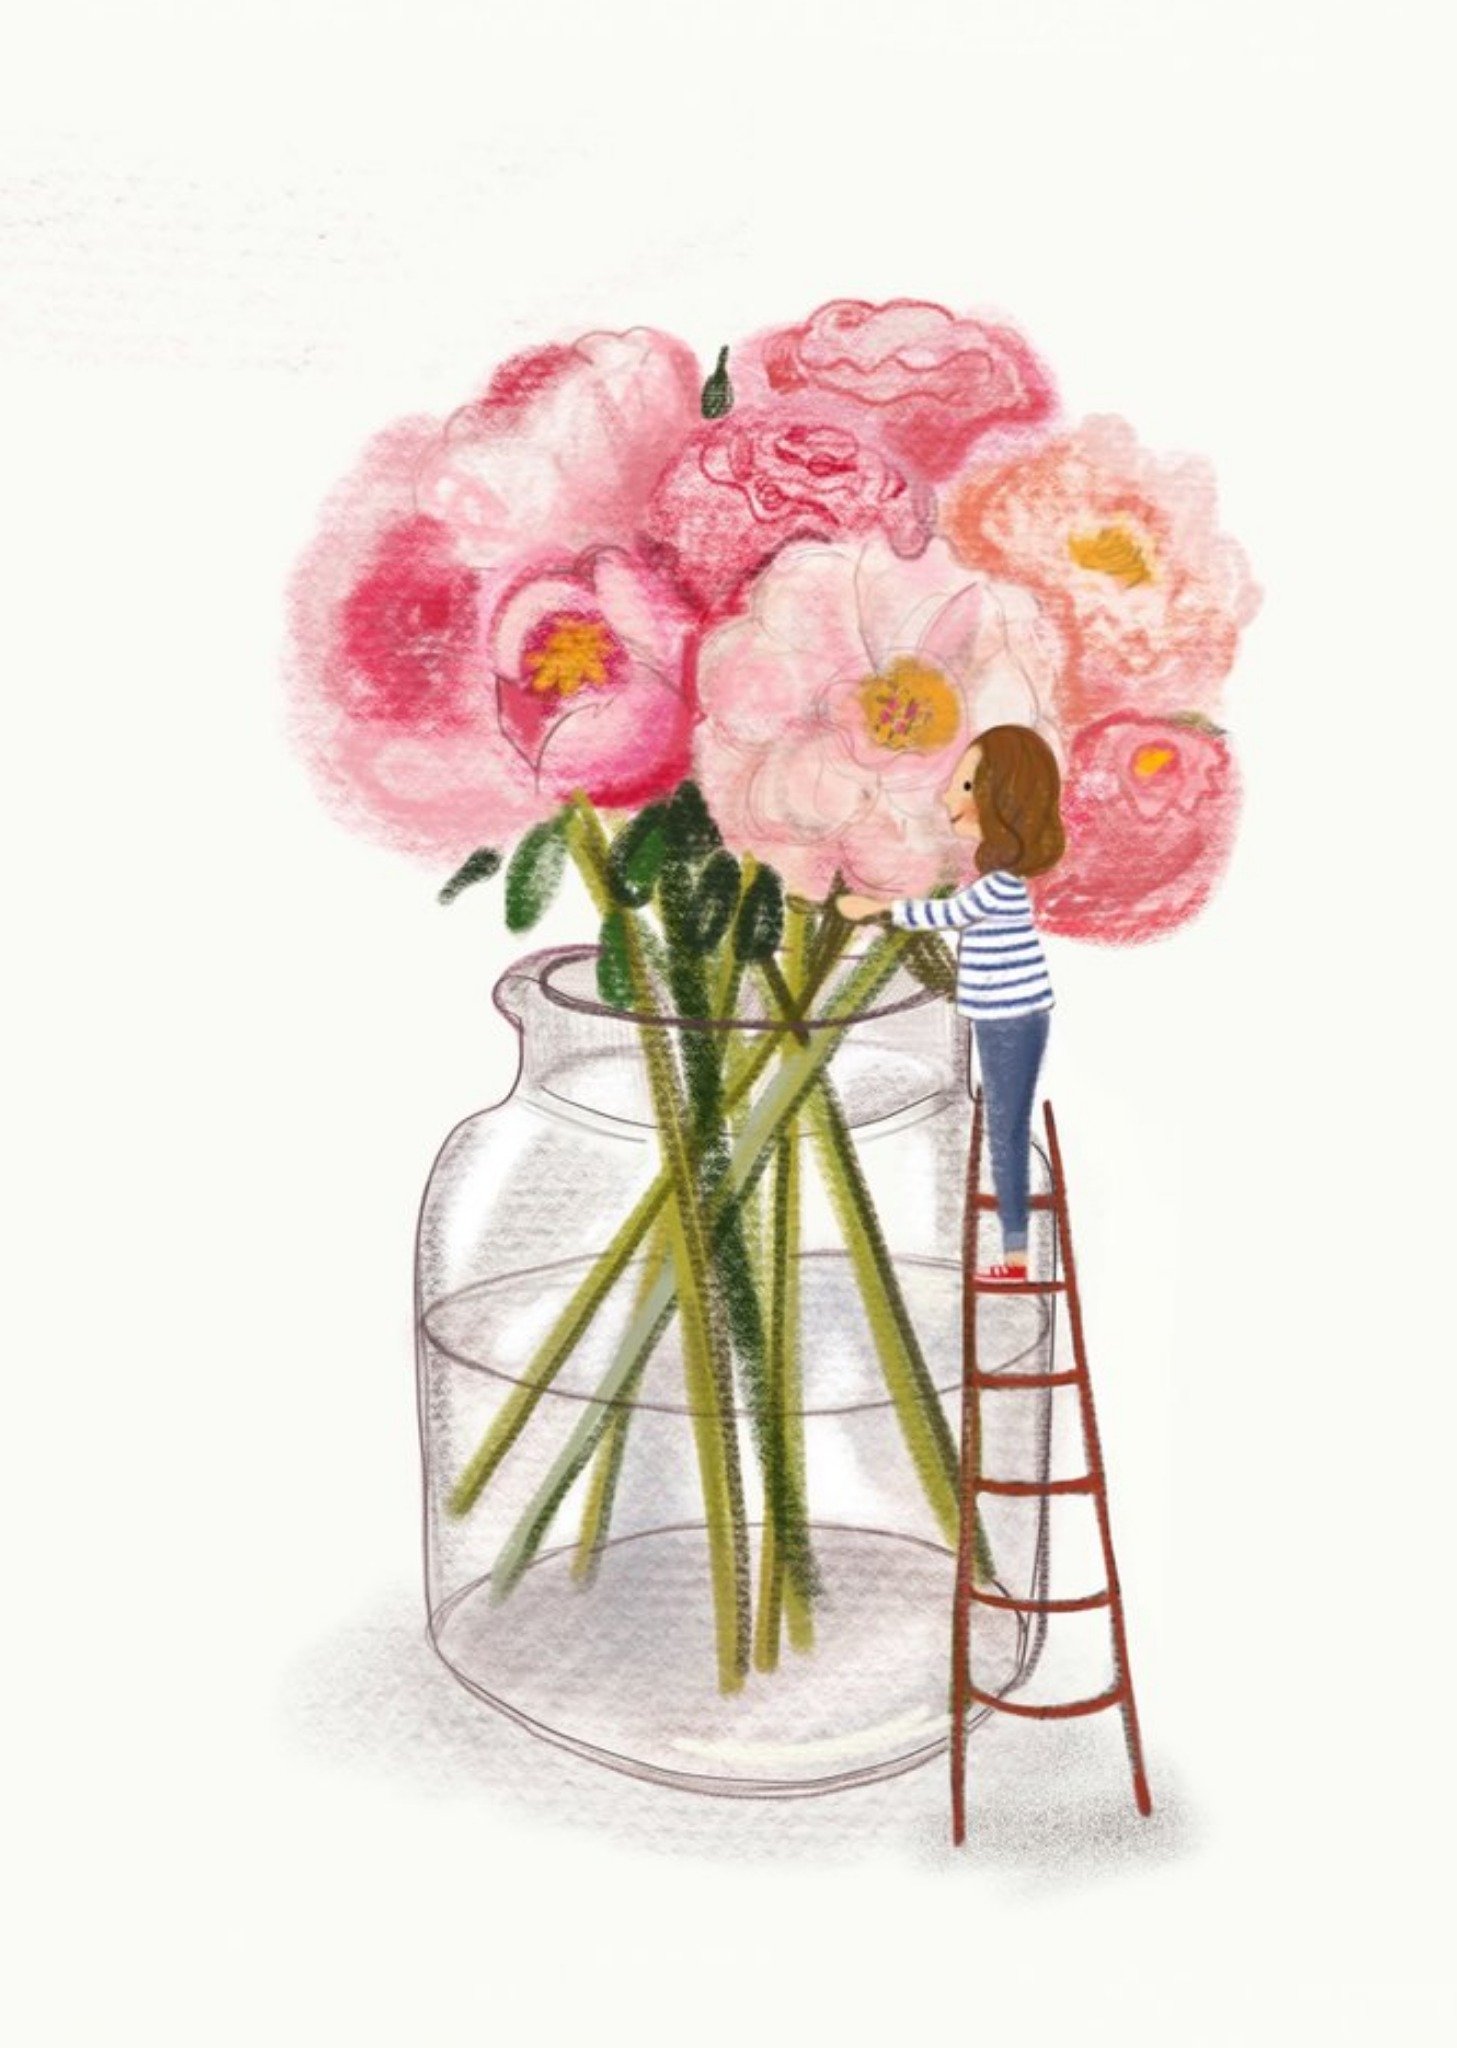 Moonpig Illustration Of A Woman With An Oversized Vase Of Flowers Birthday Card, Large